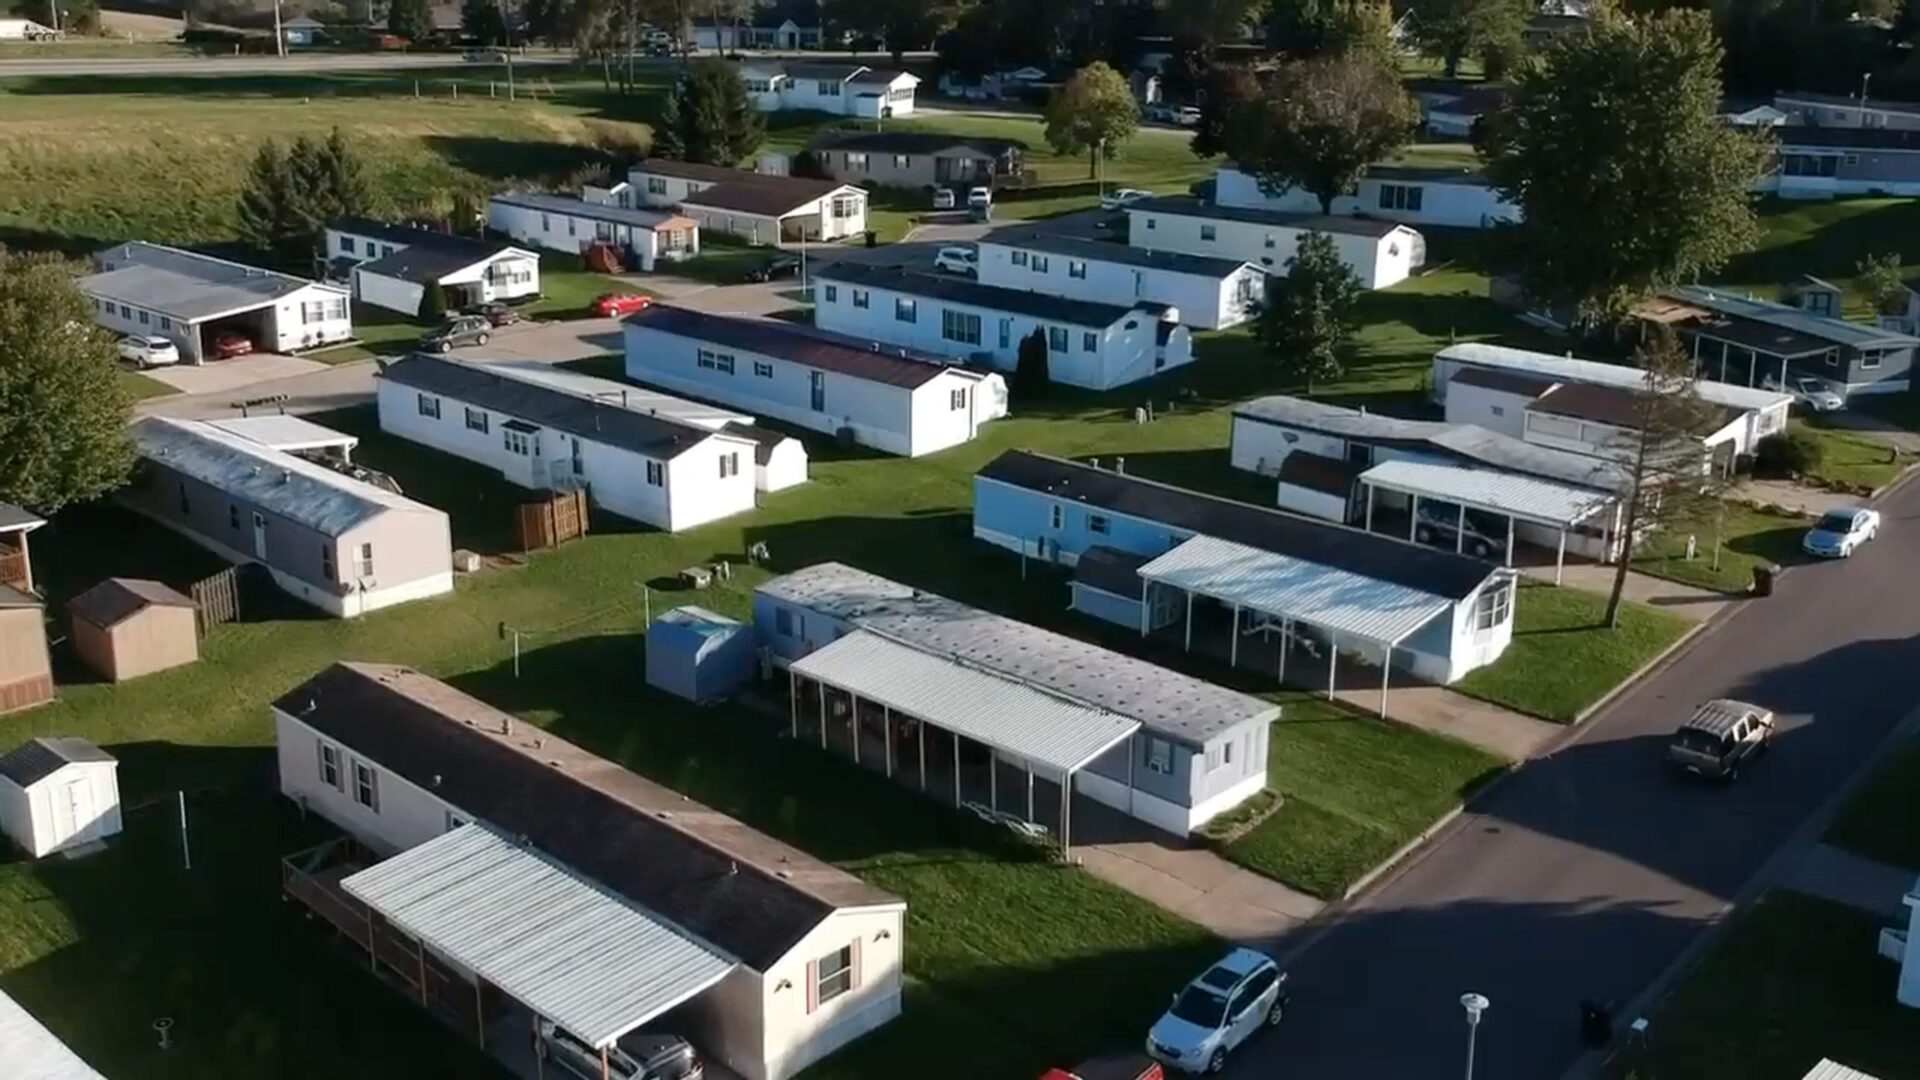 A group of mobile homes in the grass.